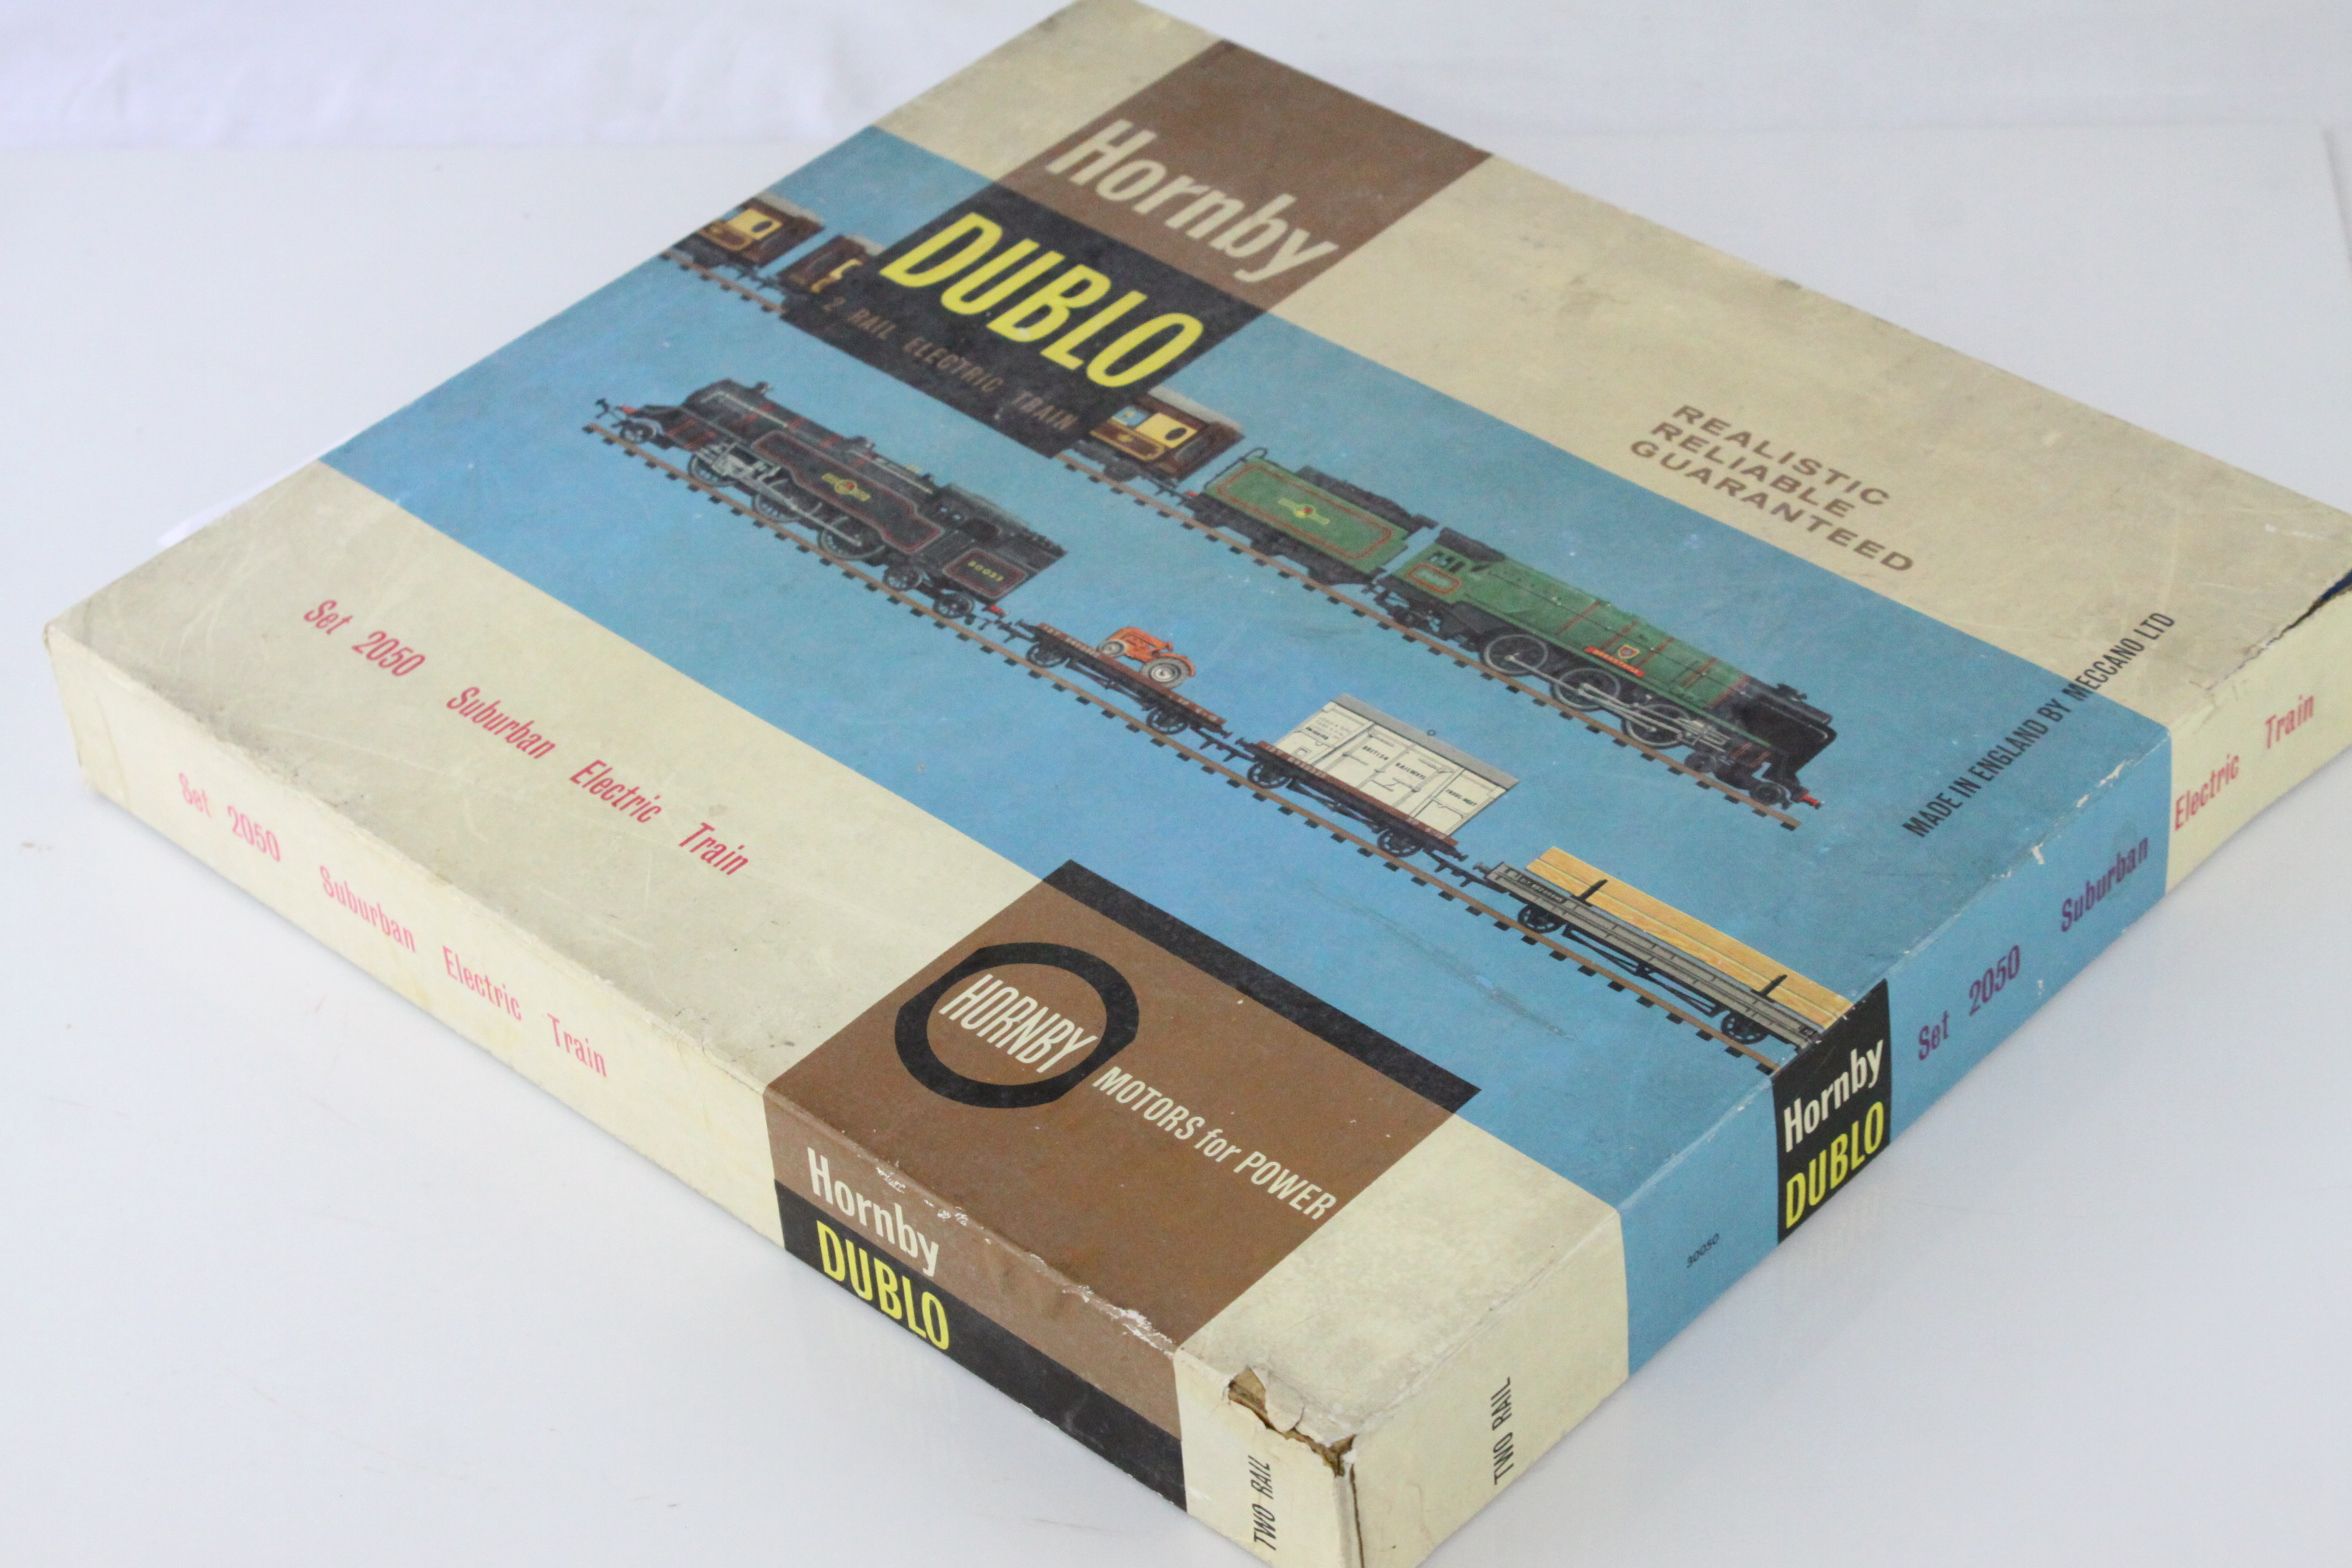 Boxed Hornby Dublo 2050 Surburban Electric Train Set, complete with paperwork, vg - Image 8 of 8